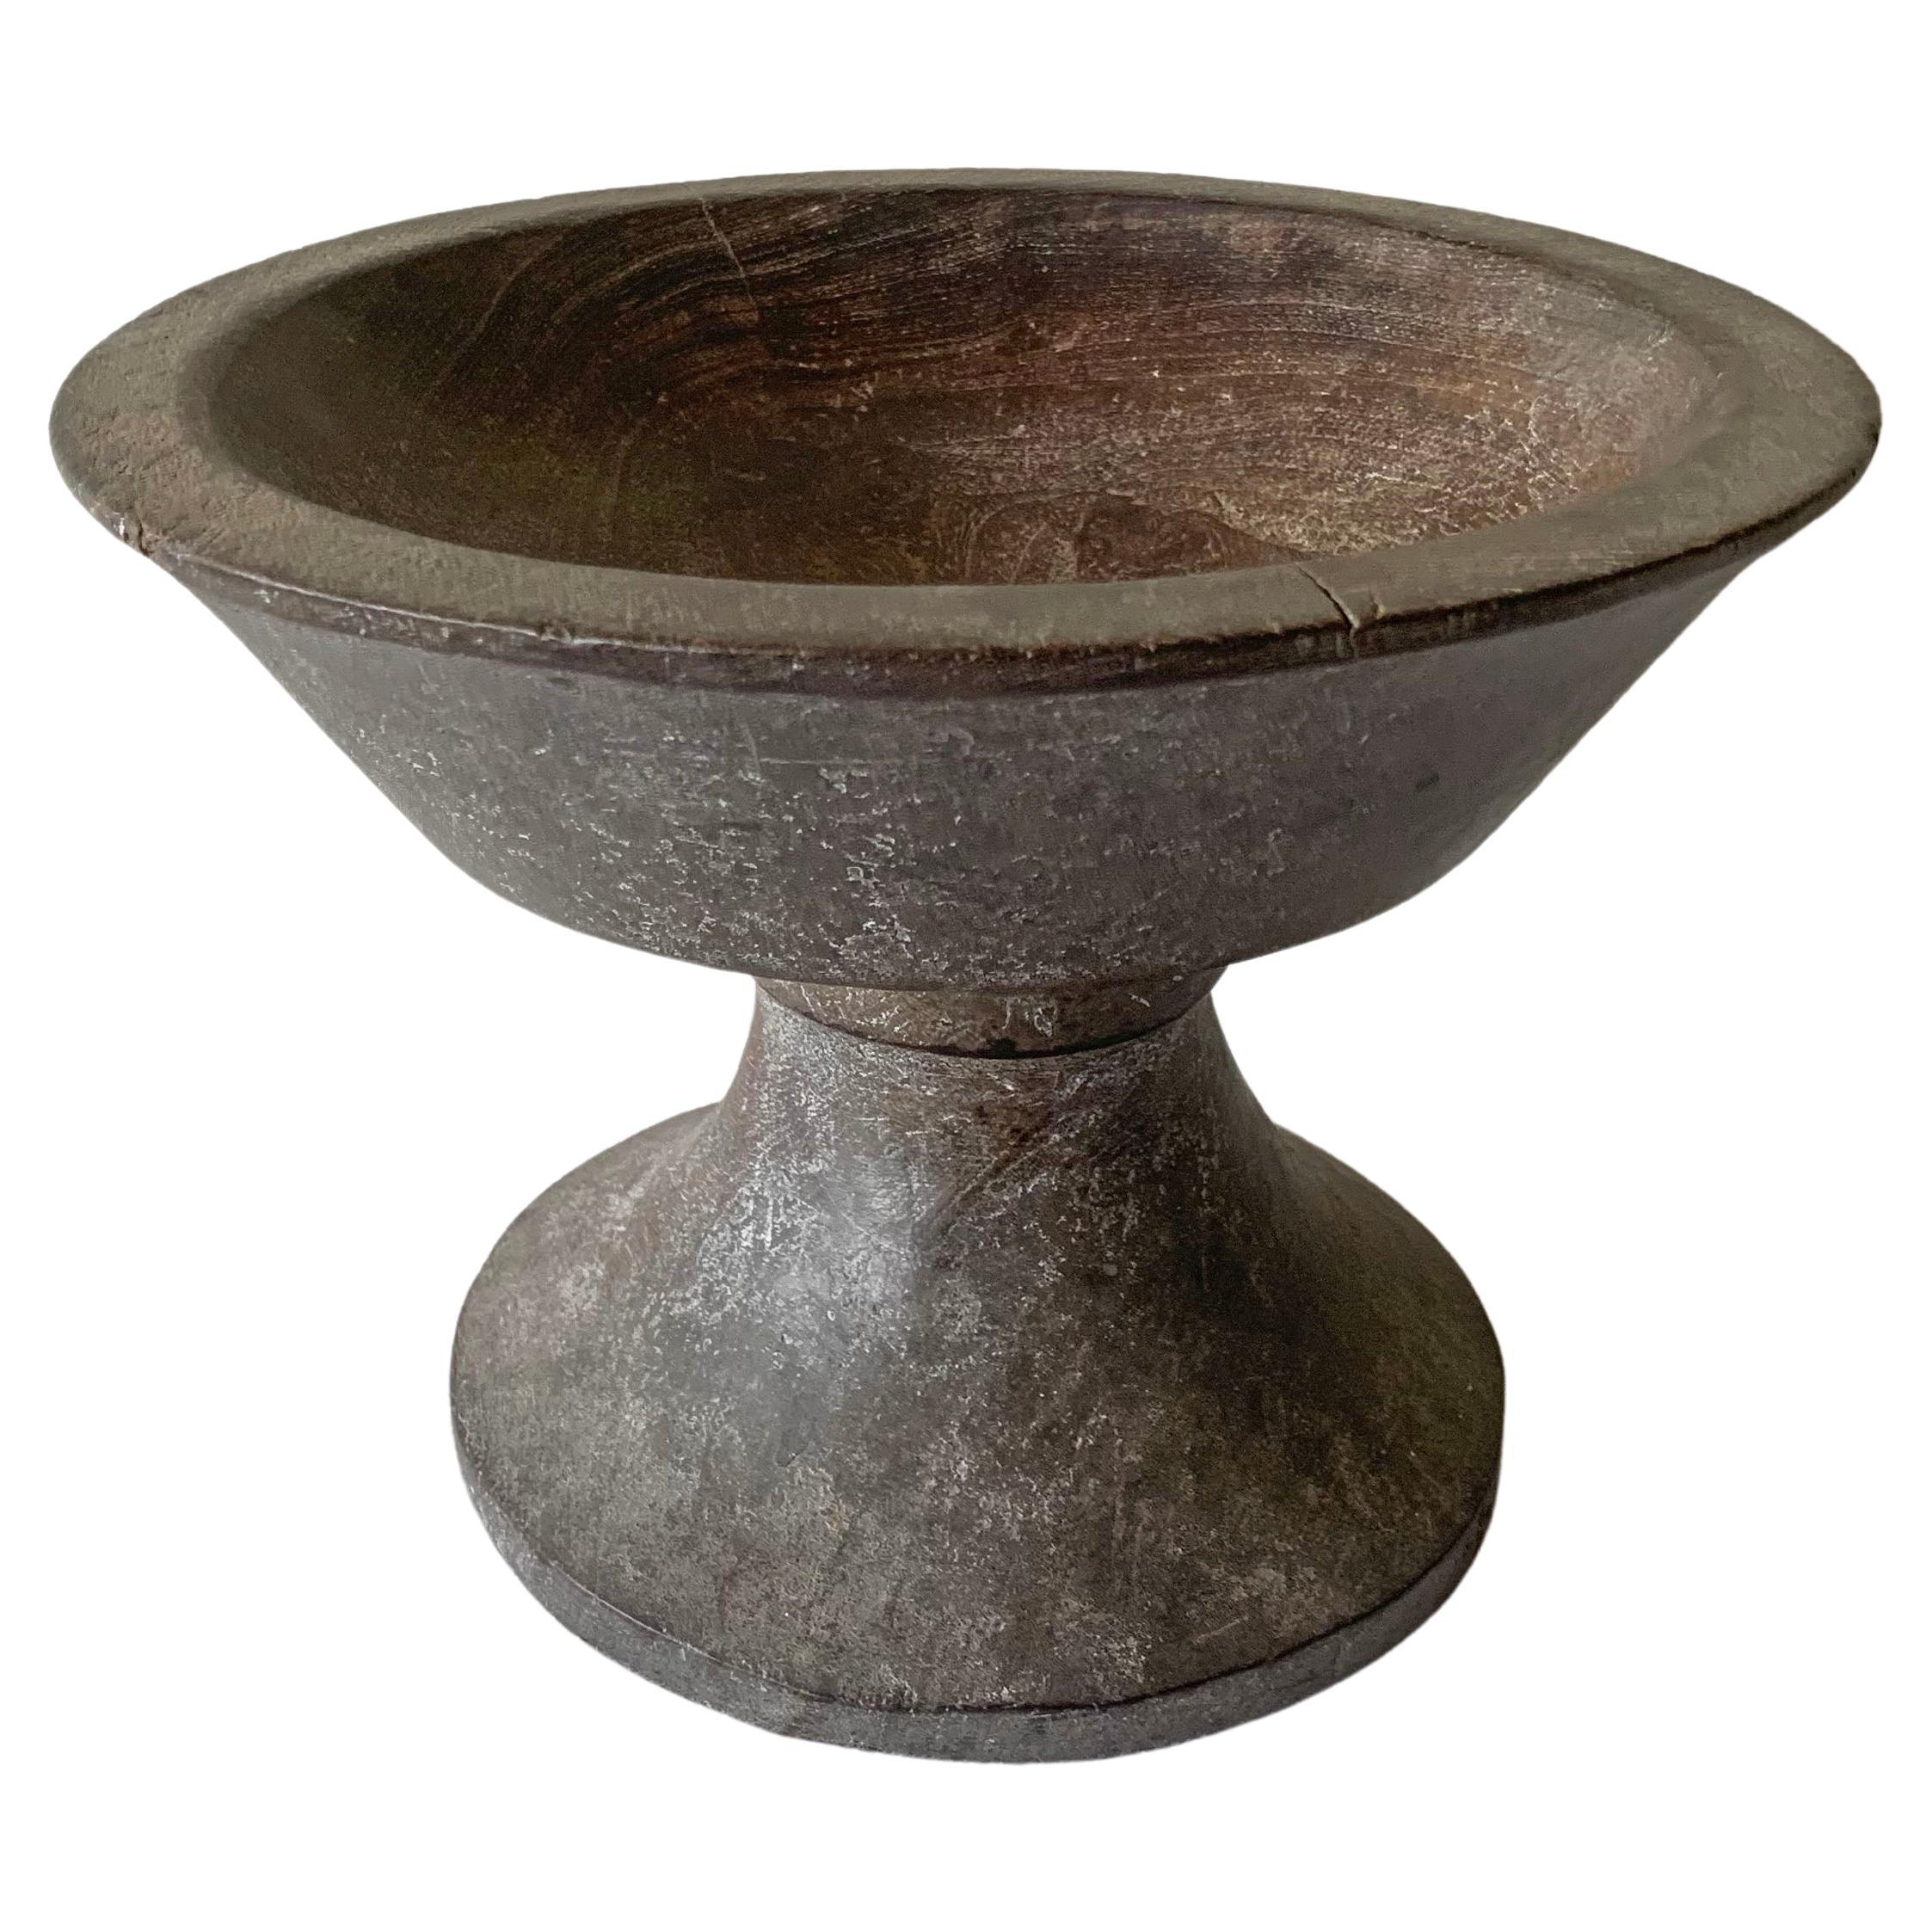 Toraja Tribe Wood Ceremonial Bowl, Sulawesi, Indonesia Early 20th Century For Sale